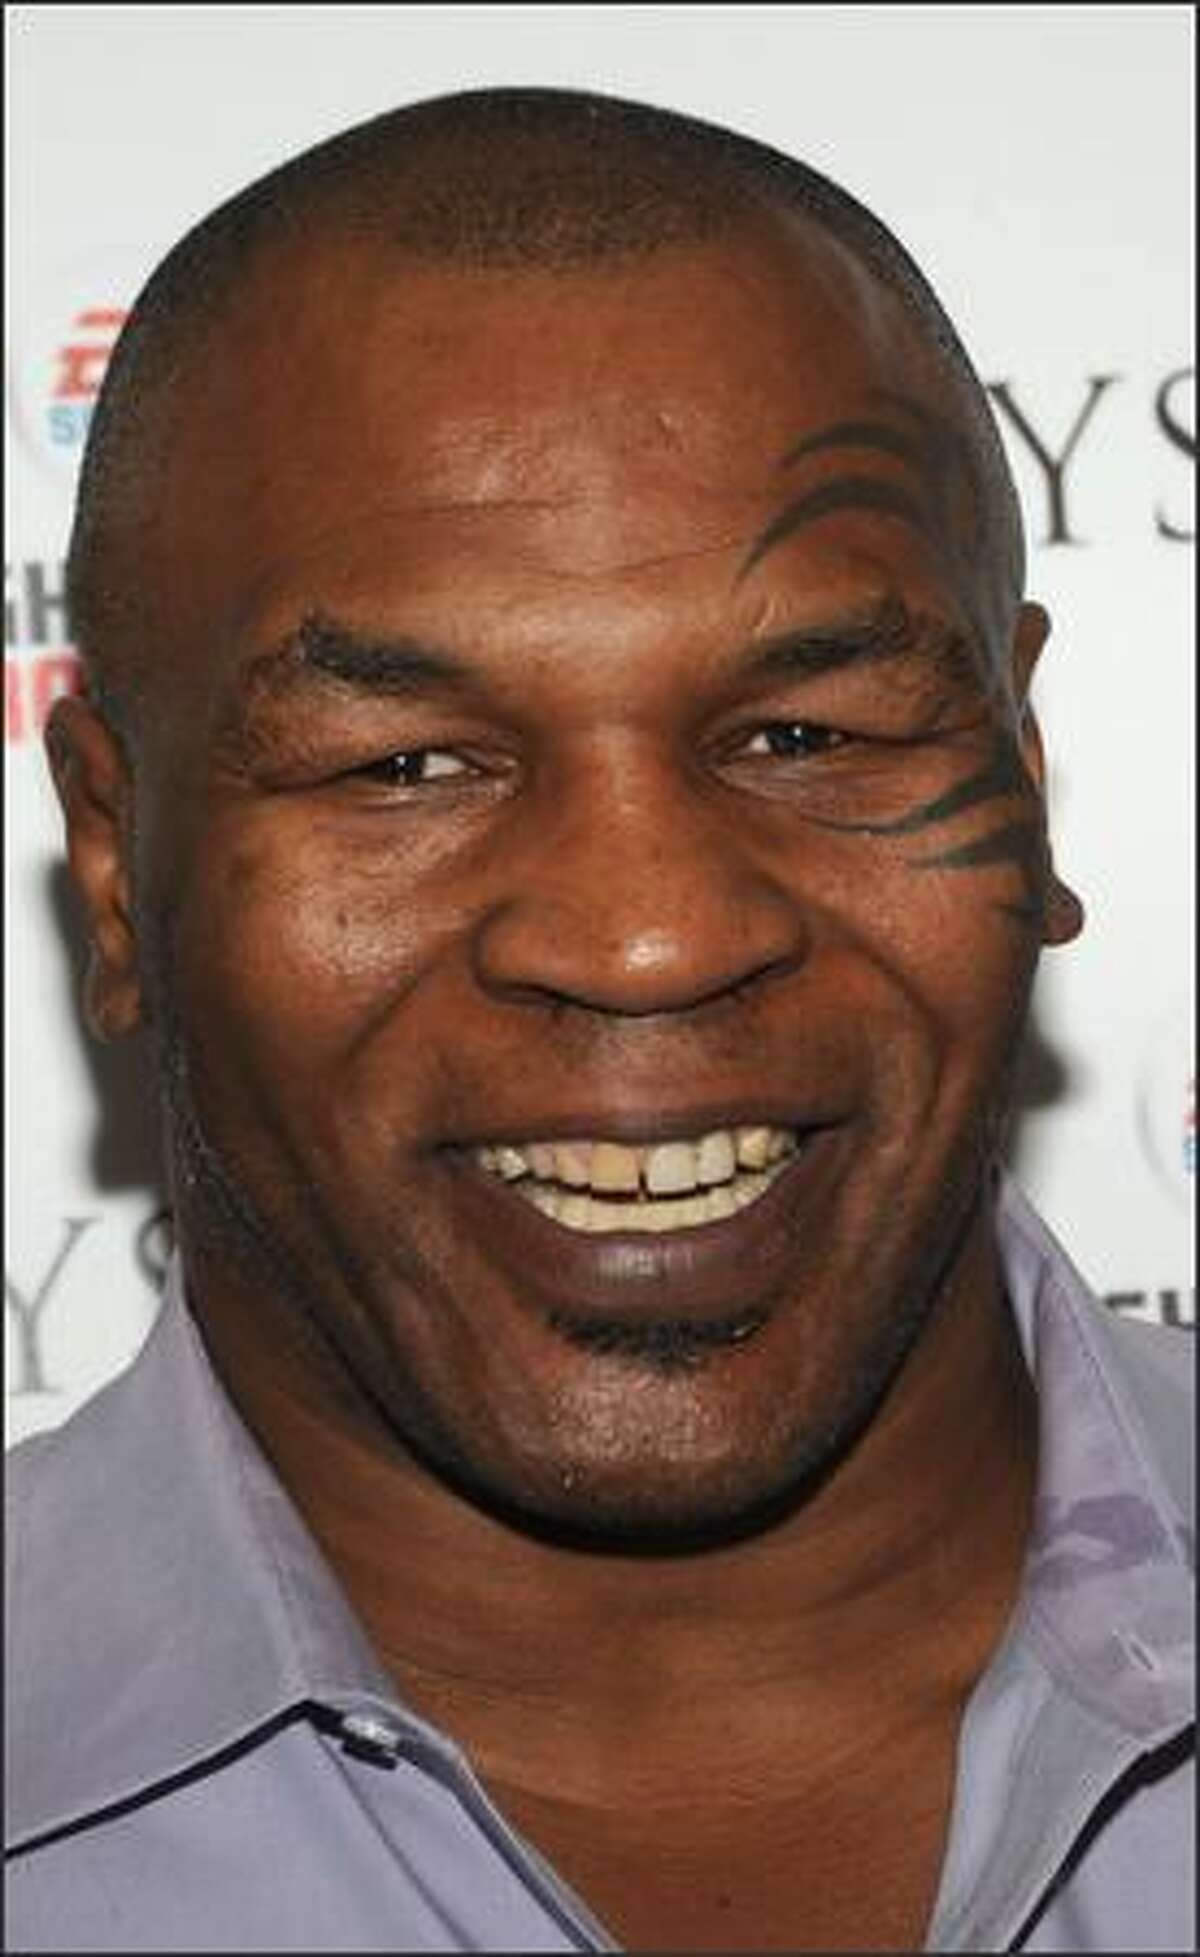 Mike Tyson attends Sony Pictures Classics' screening of "Tyson" at the AMC Loews 19th Street in New York City, New York.